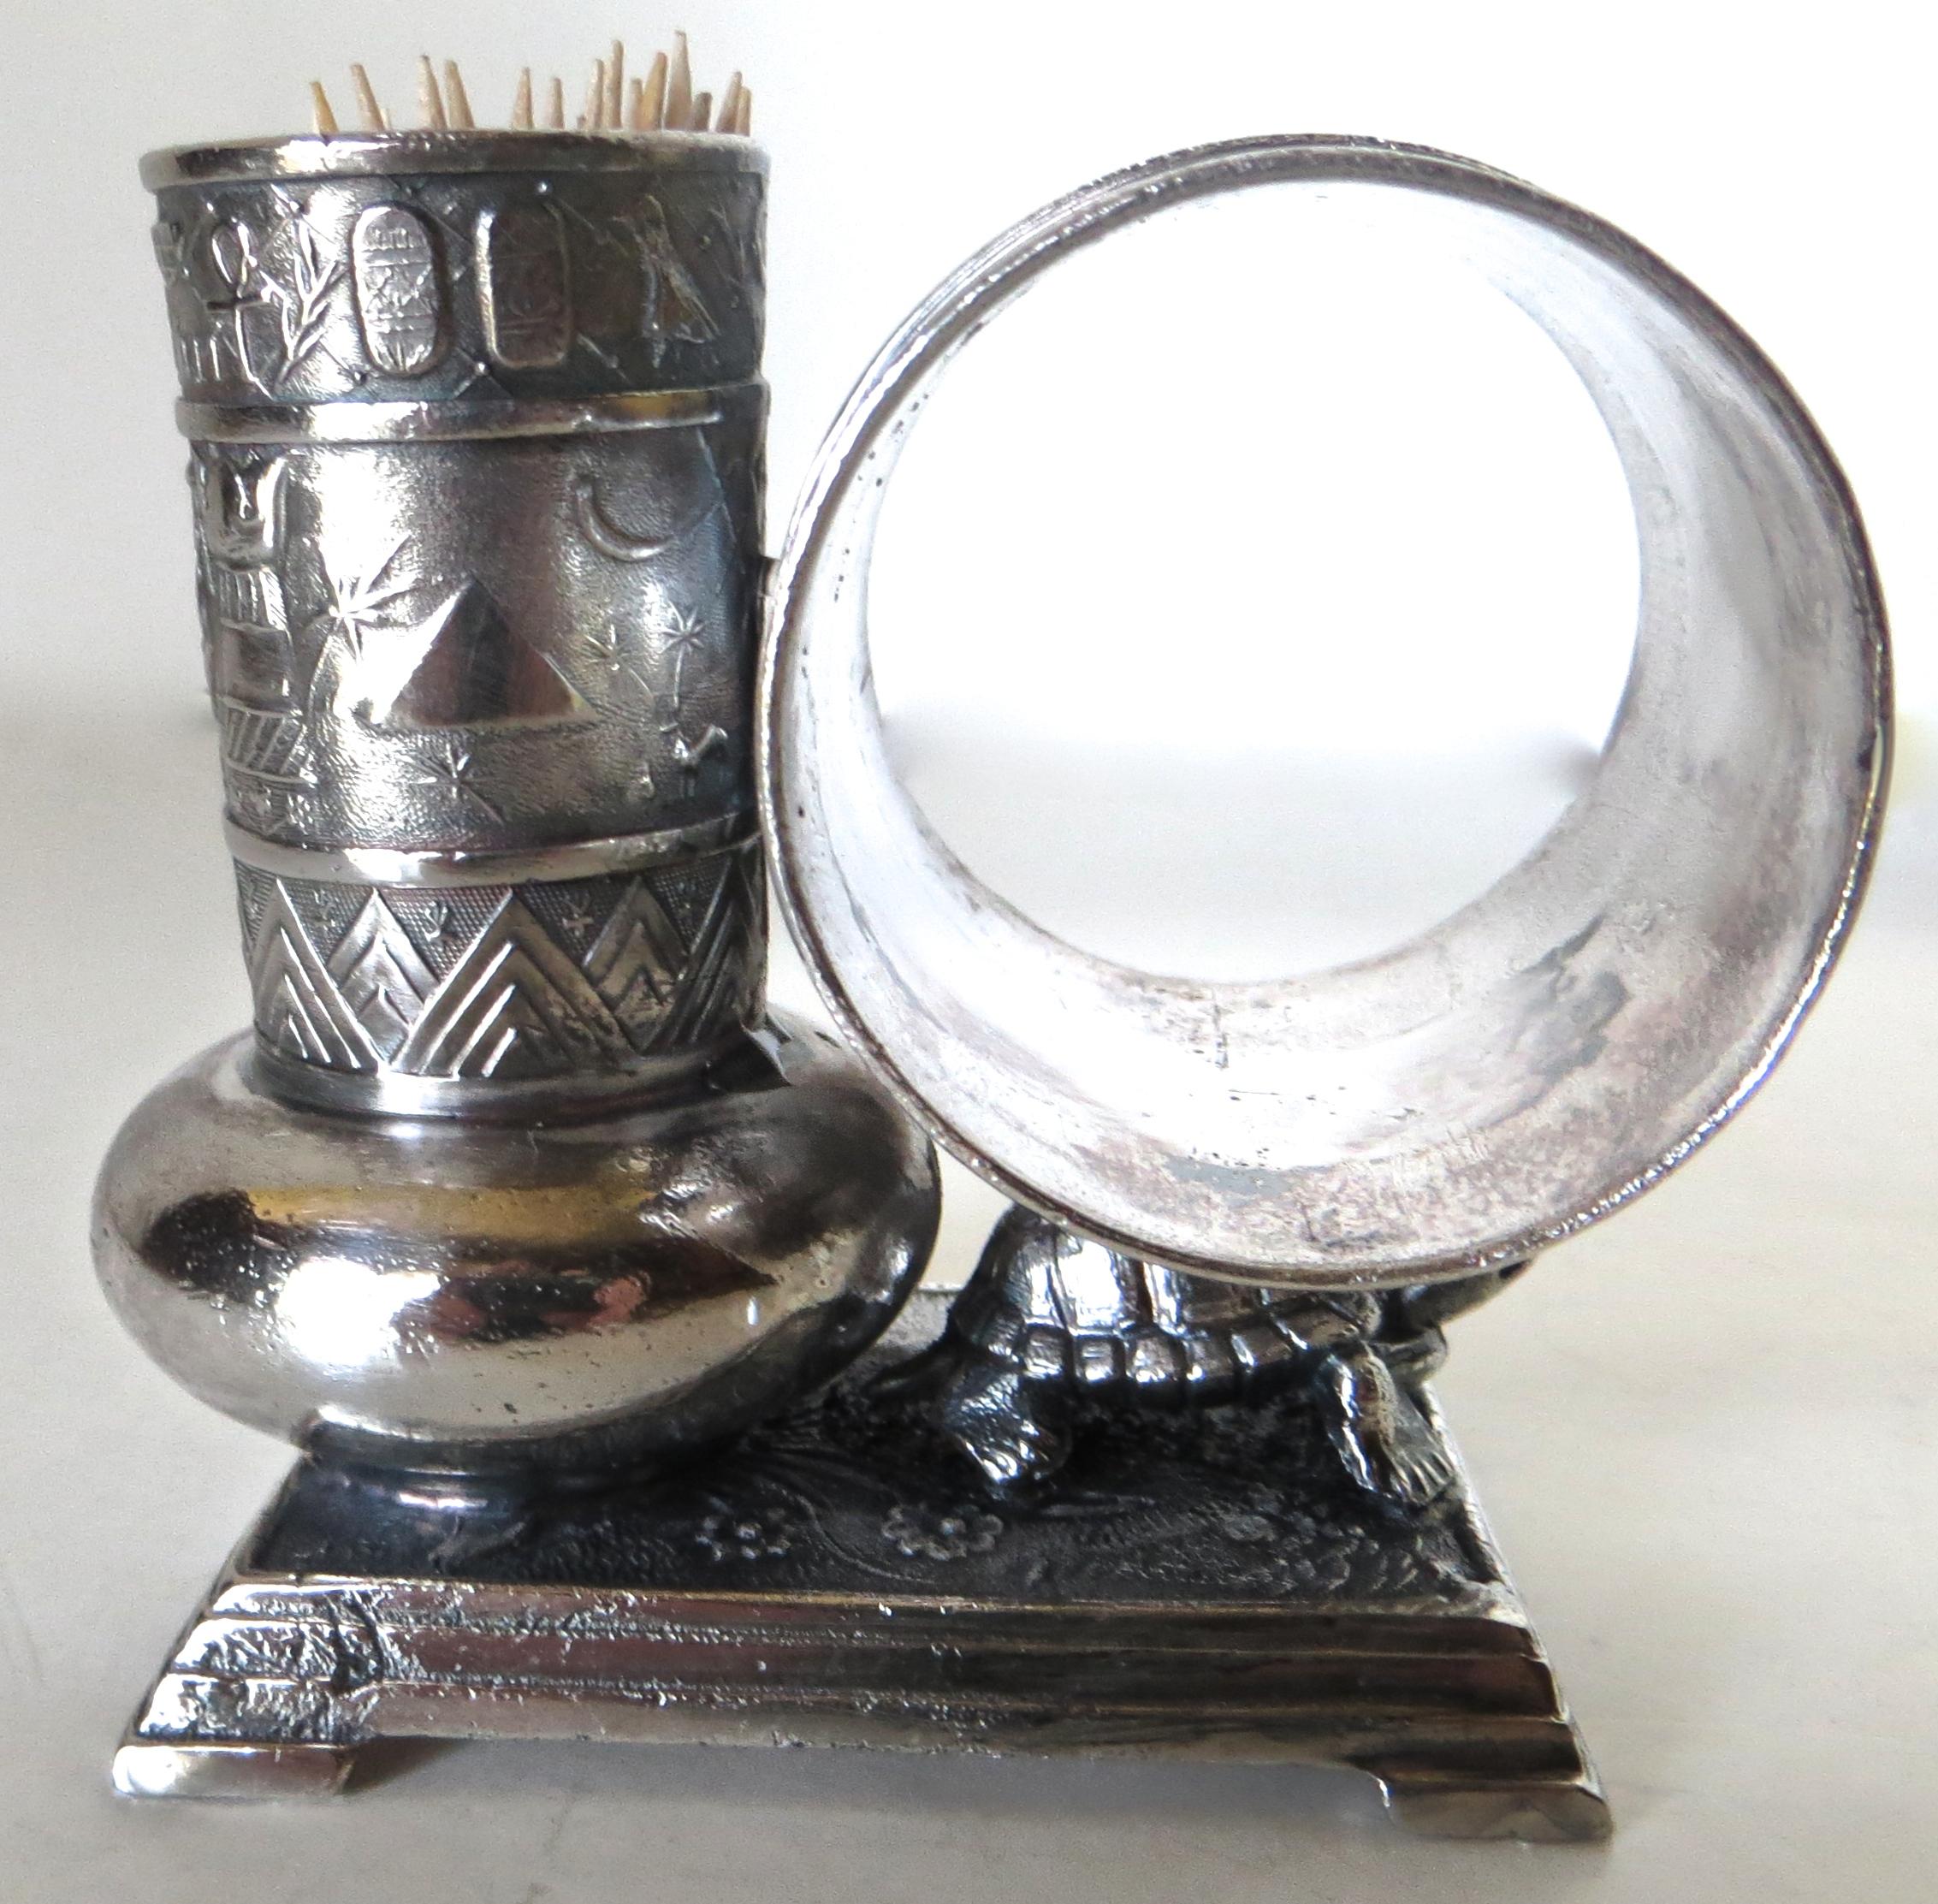 Silvered Victorian Silver Plate Turtle Napkin Ring and Bud Vase, American, circa 1880